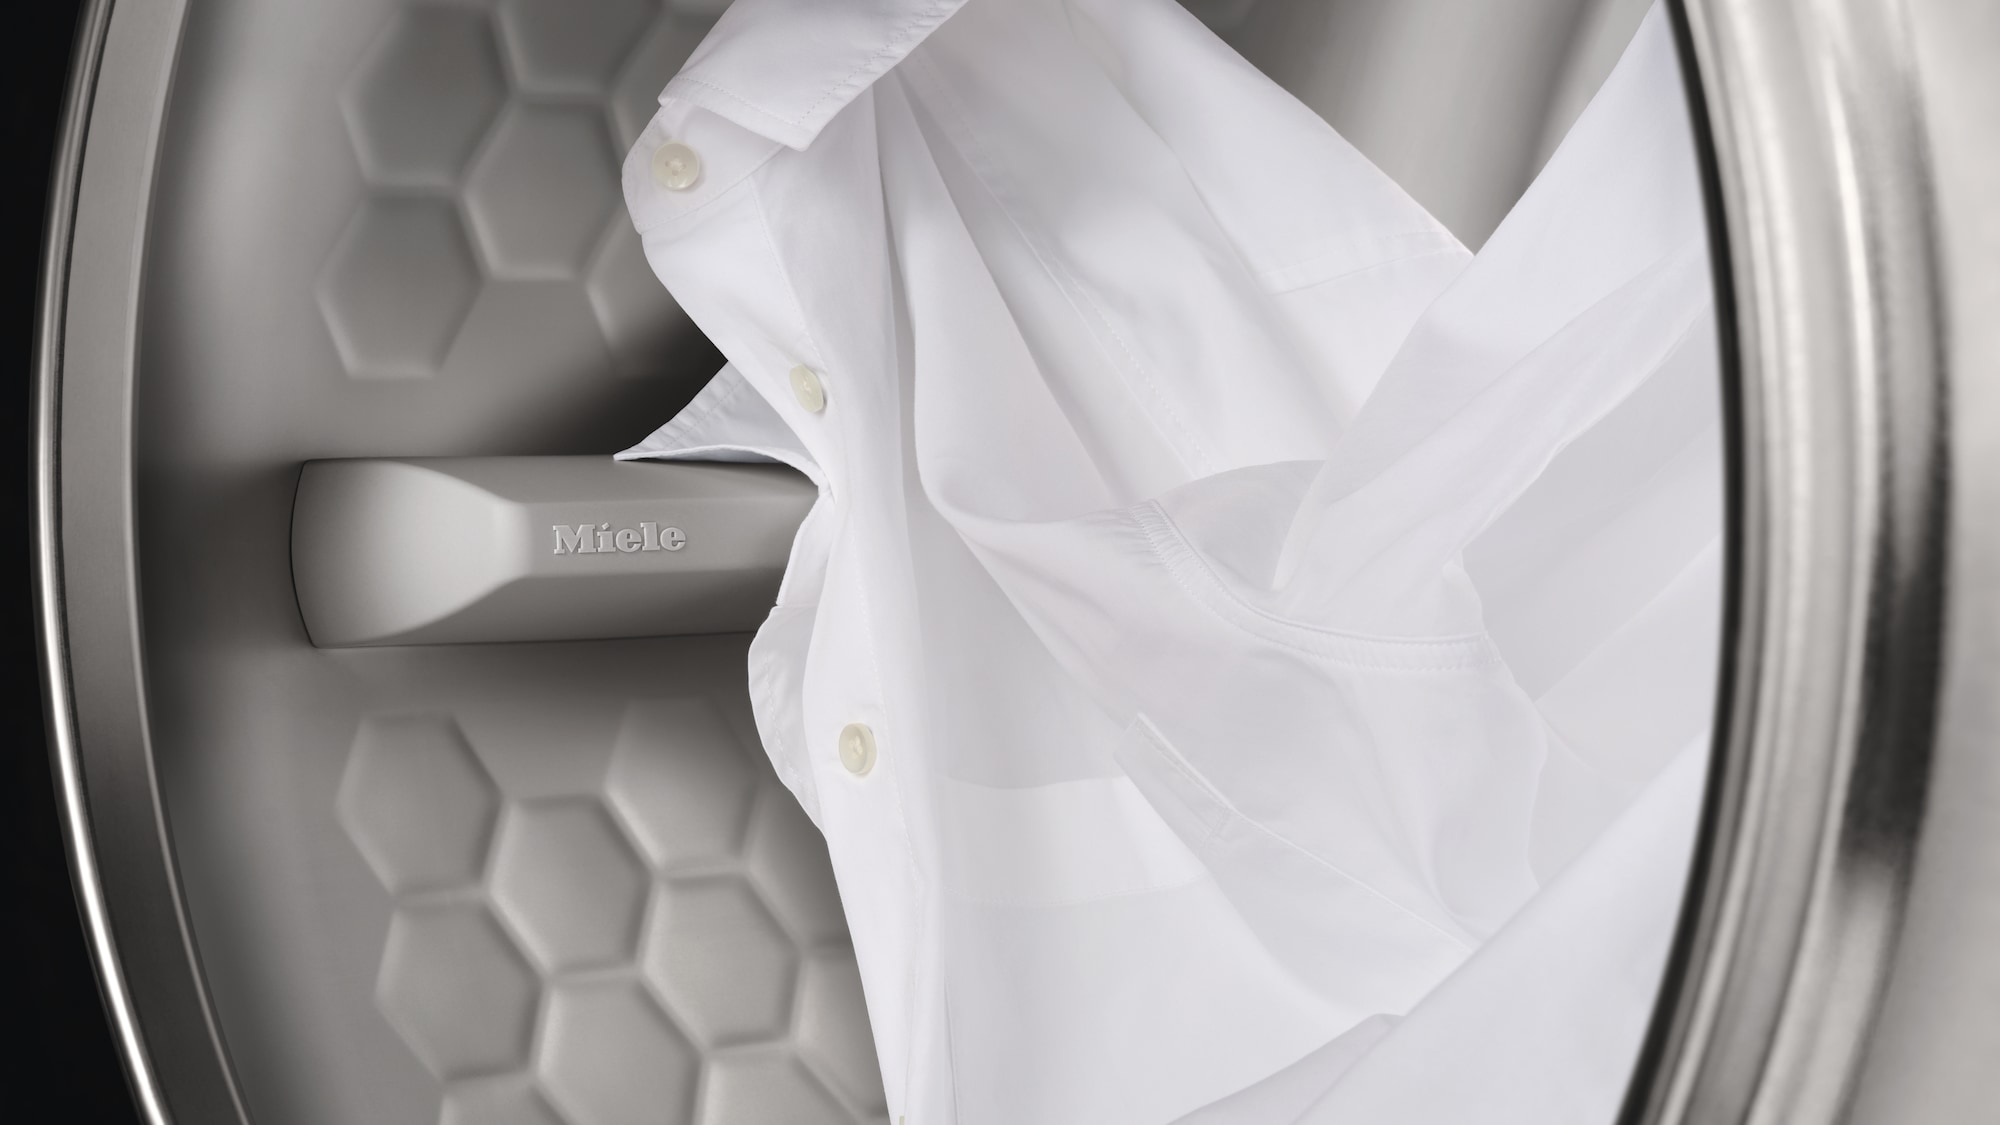 Image of the Miele honeycomb drum